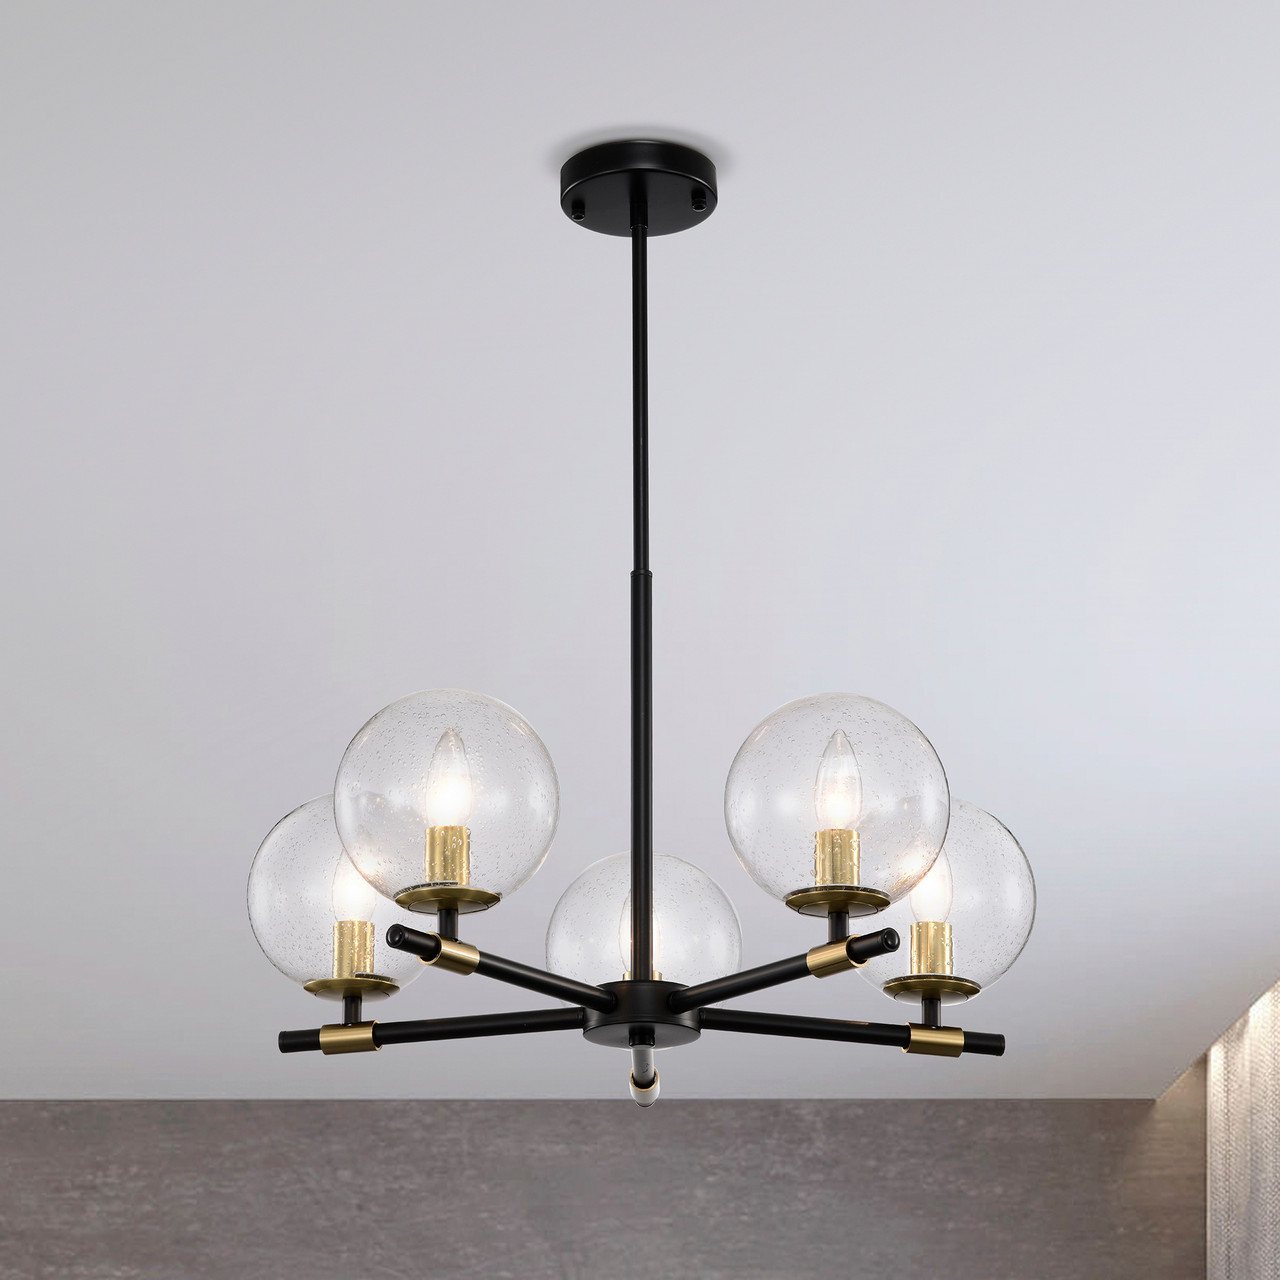 WAREHOUSE OF TIFFANY'S GD01-42BB Shauna 22 in. 5-Light Indoor Matte black and Brass Finish Chandelier with Light Kit